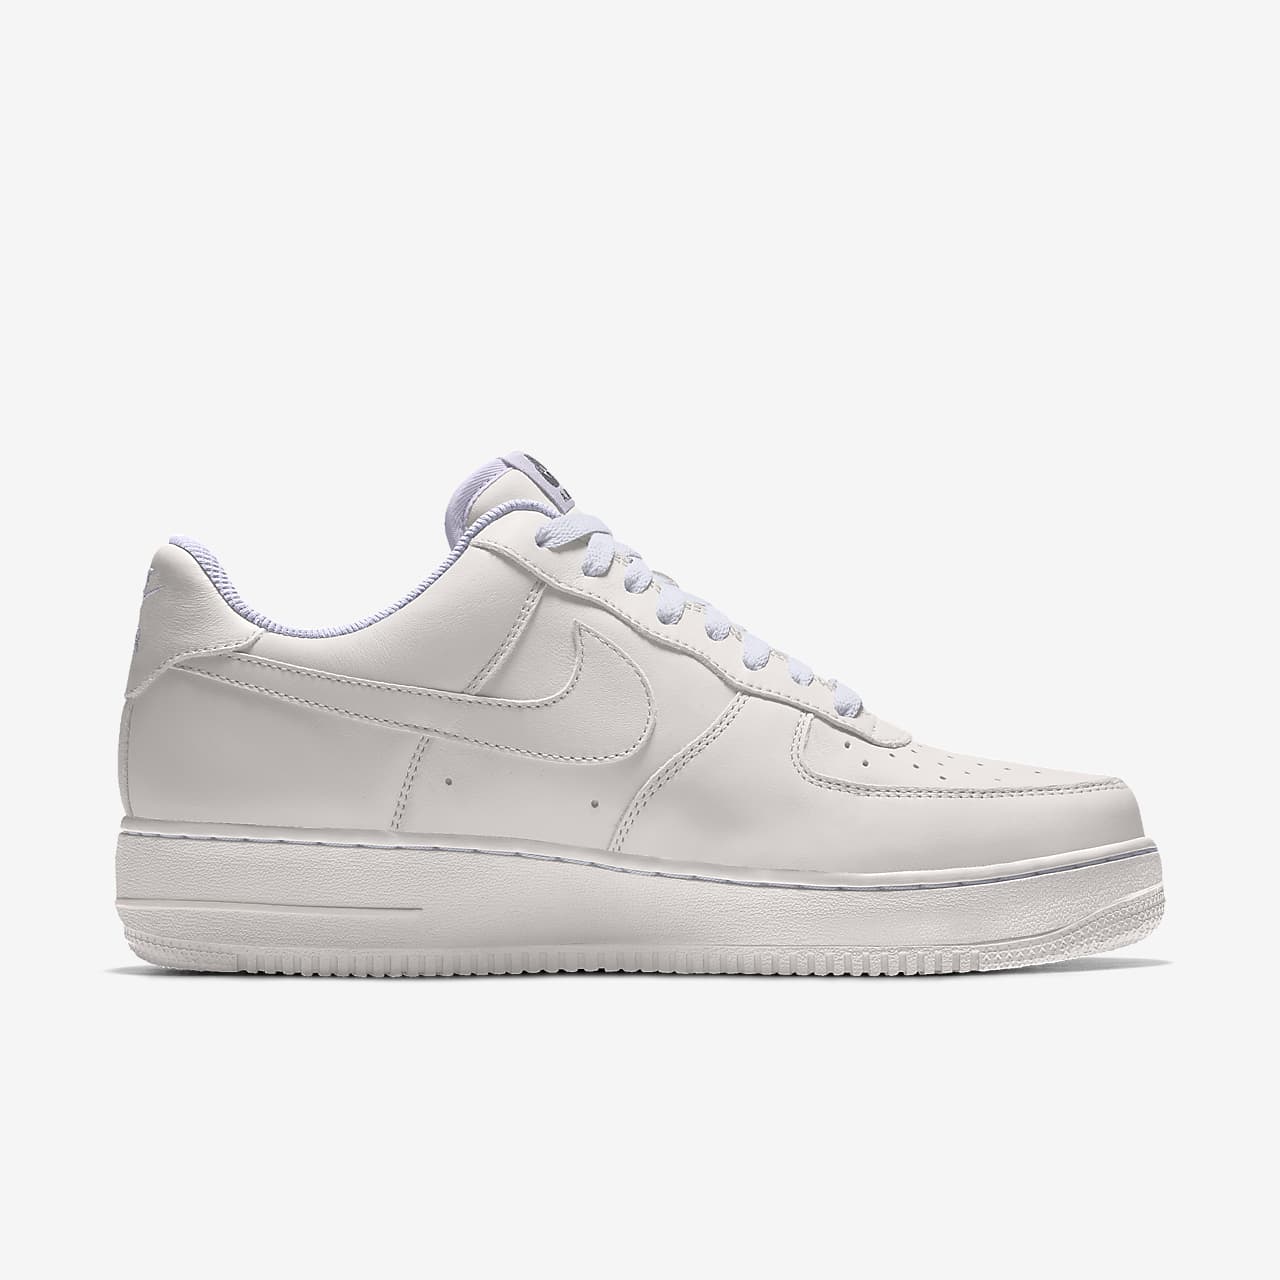 ripple leather air force